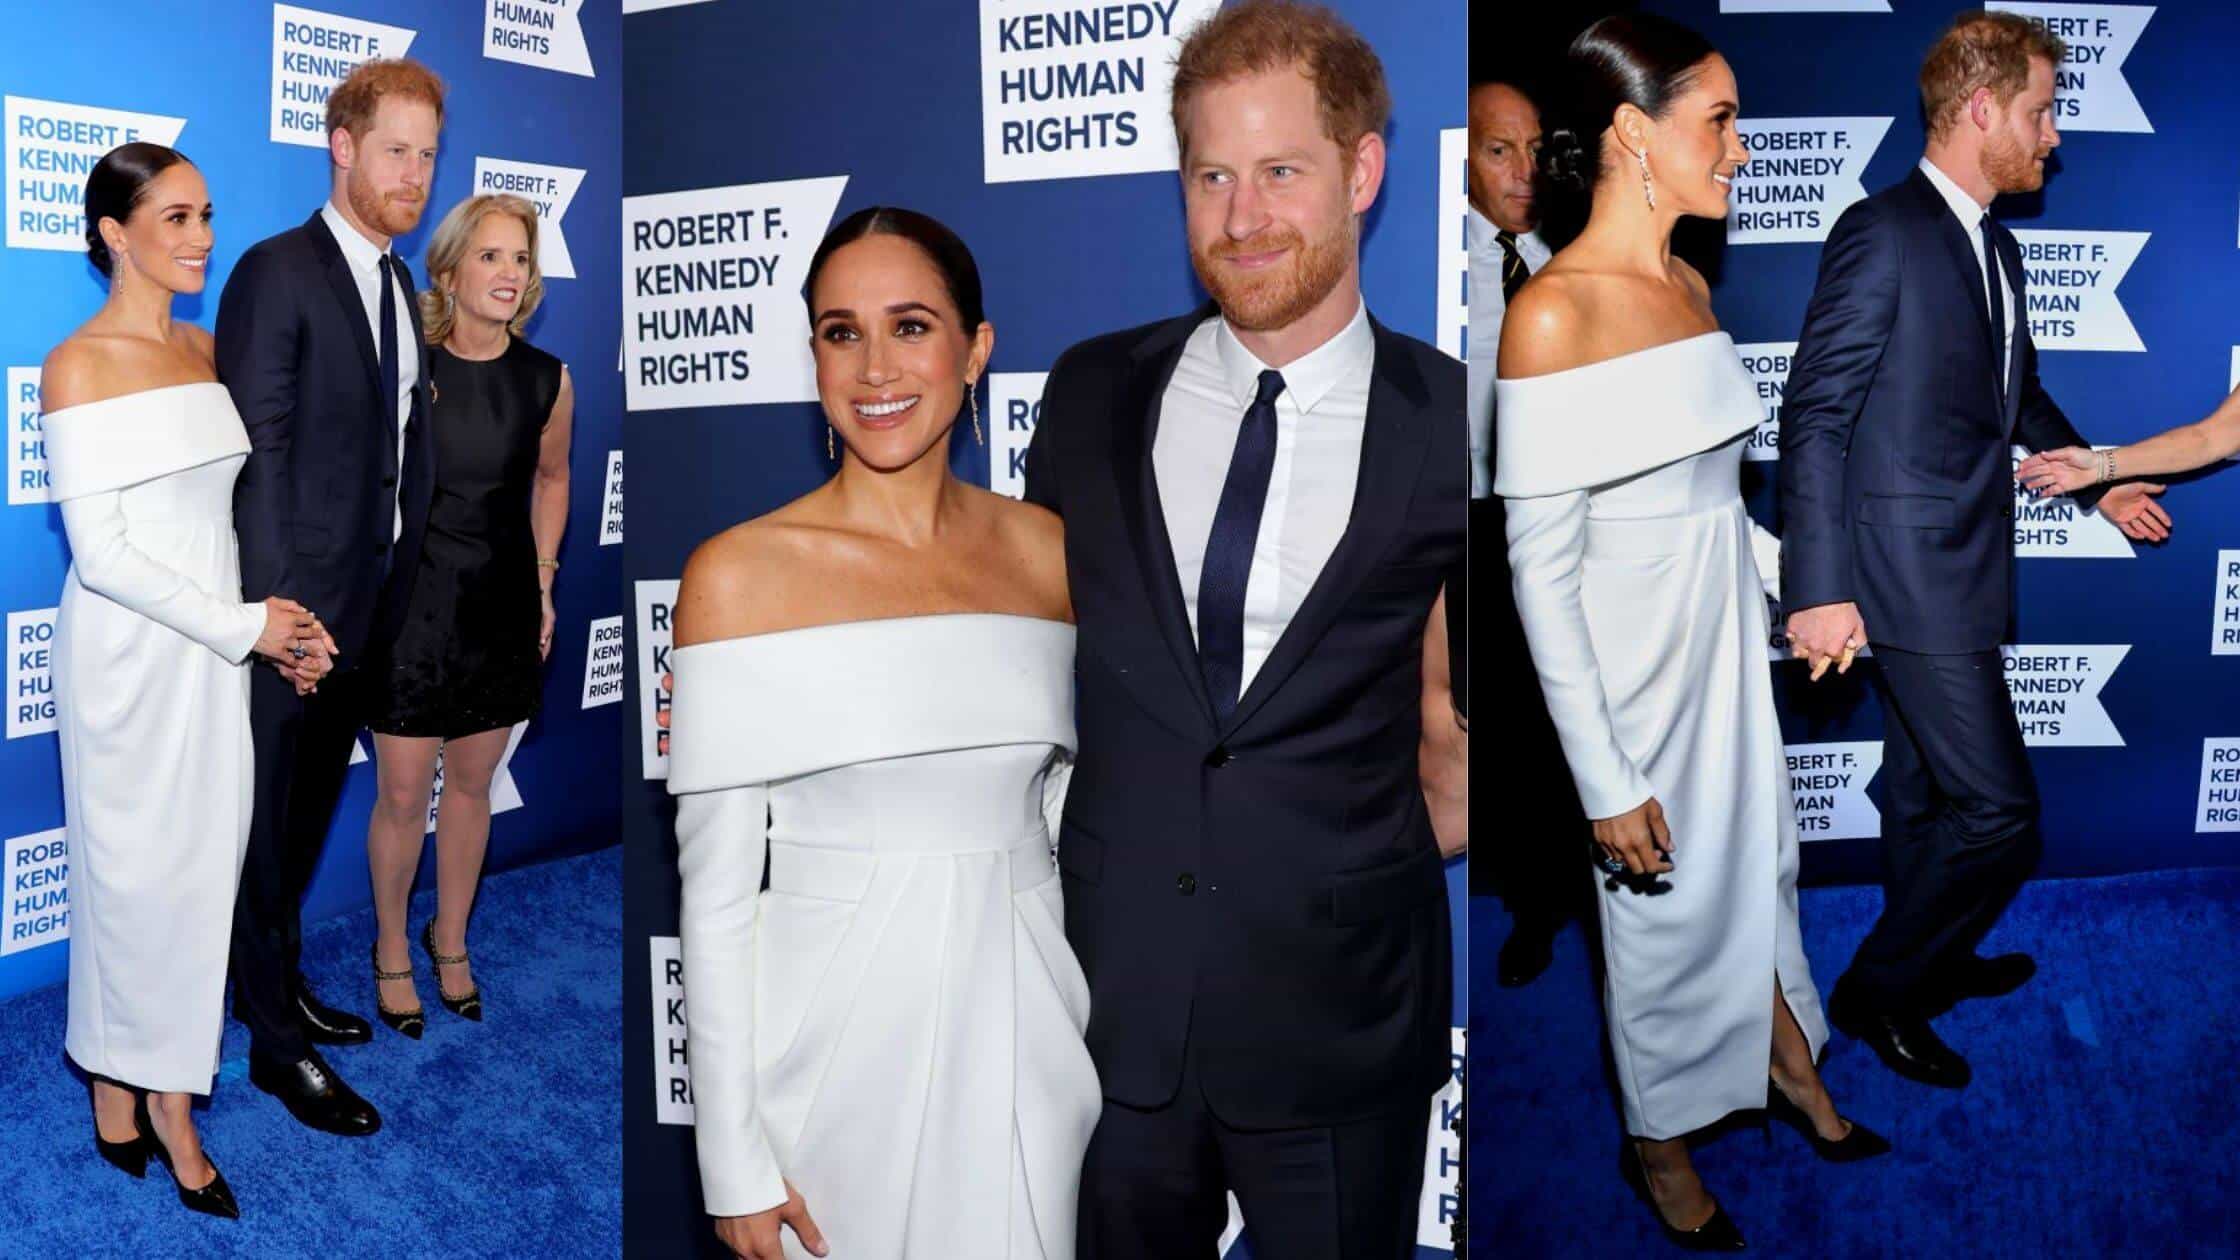 Meghan Markle Wore A Diamond Ring For Ripple Of Hope Award Gala 2022 Guess Whose It Is